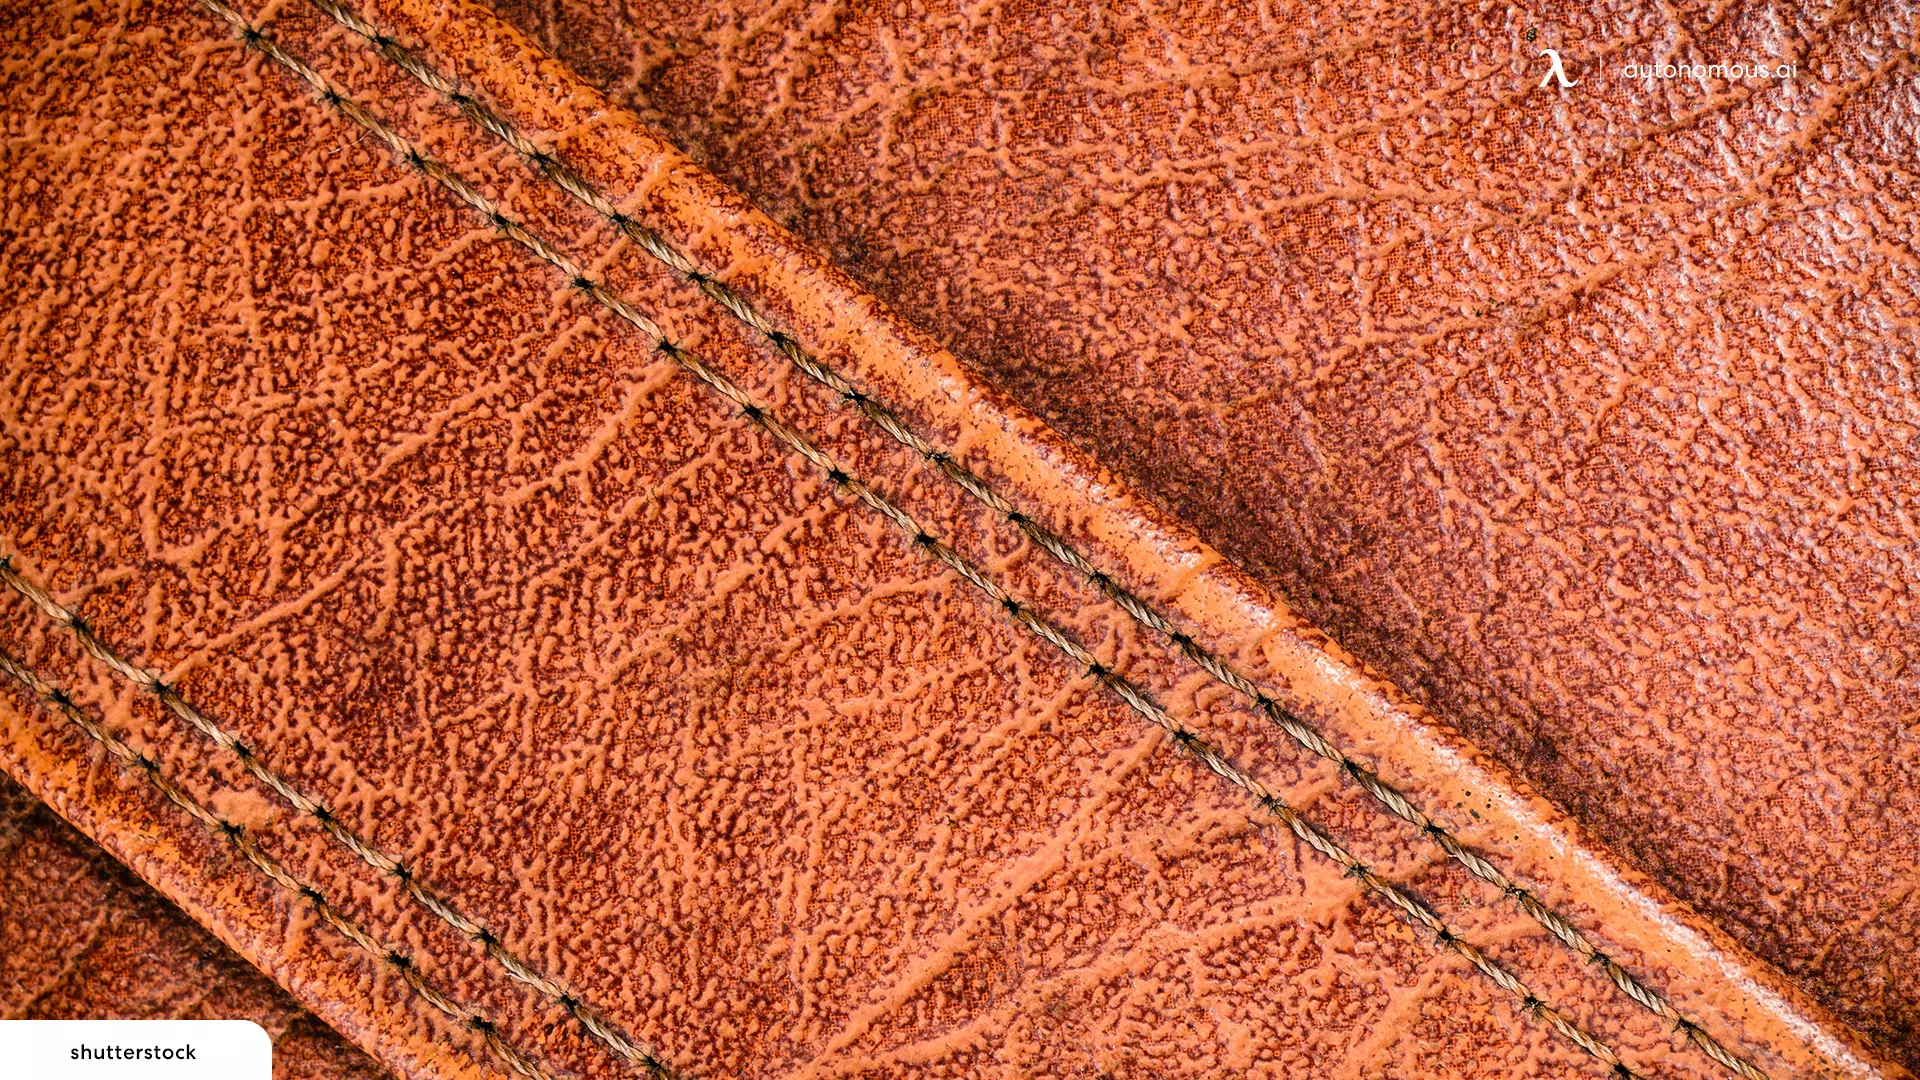 Comparisons About Other Types of Leather